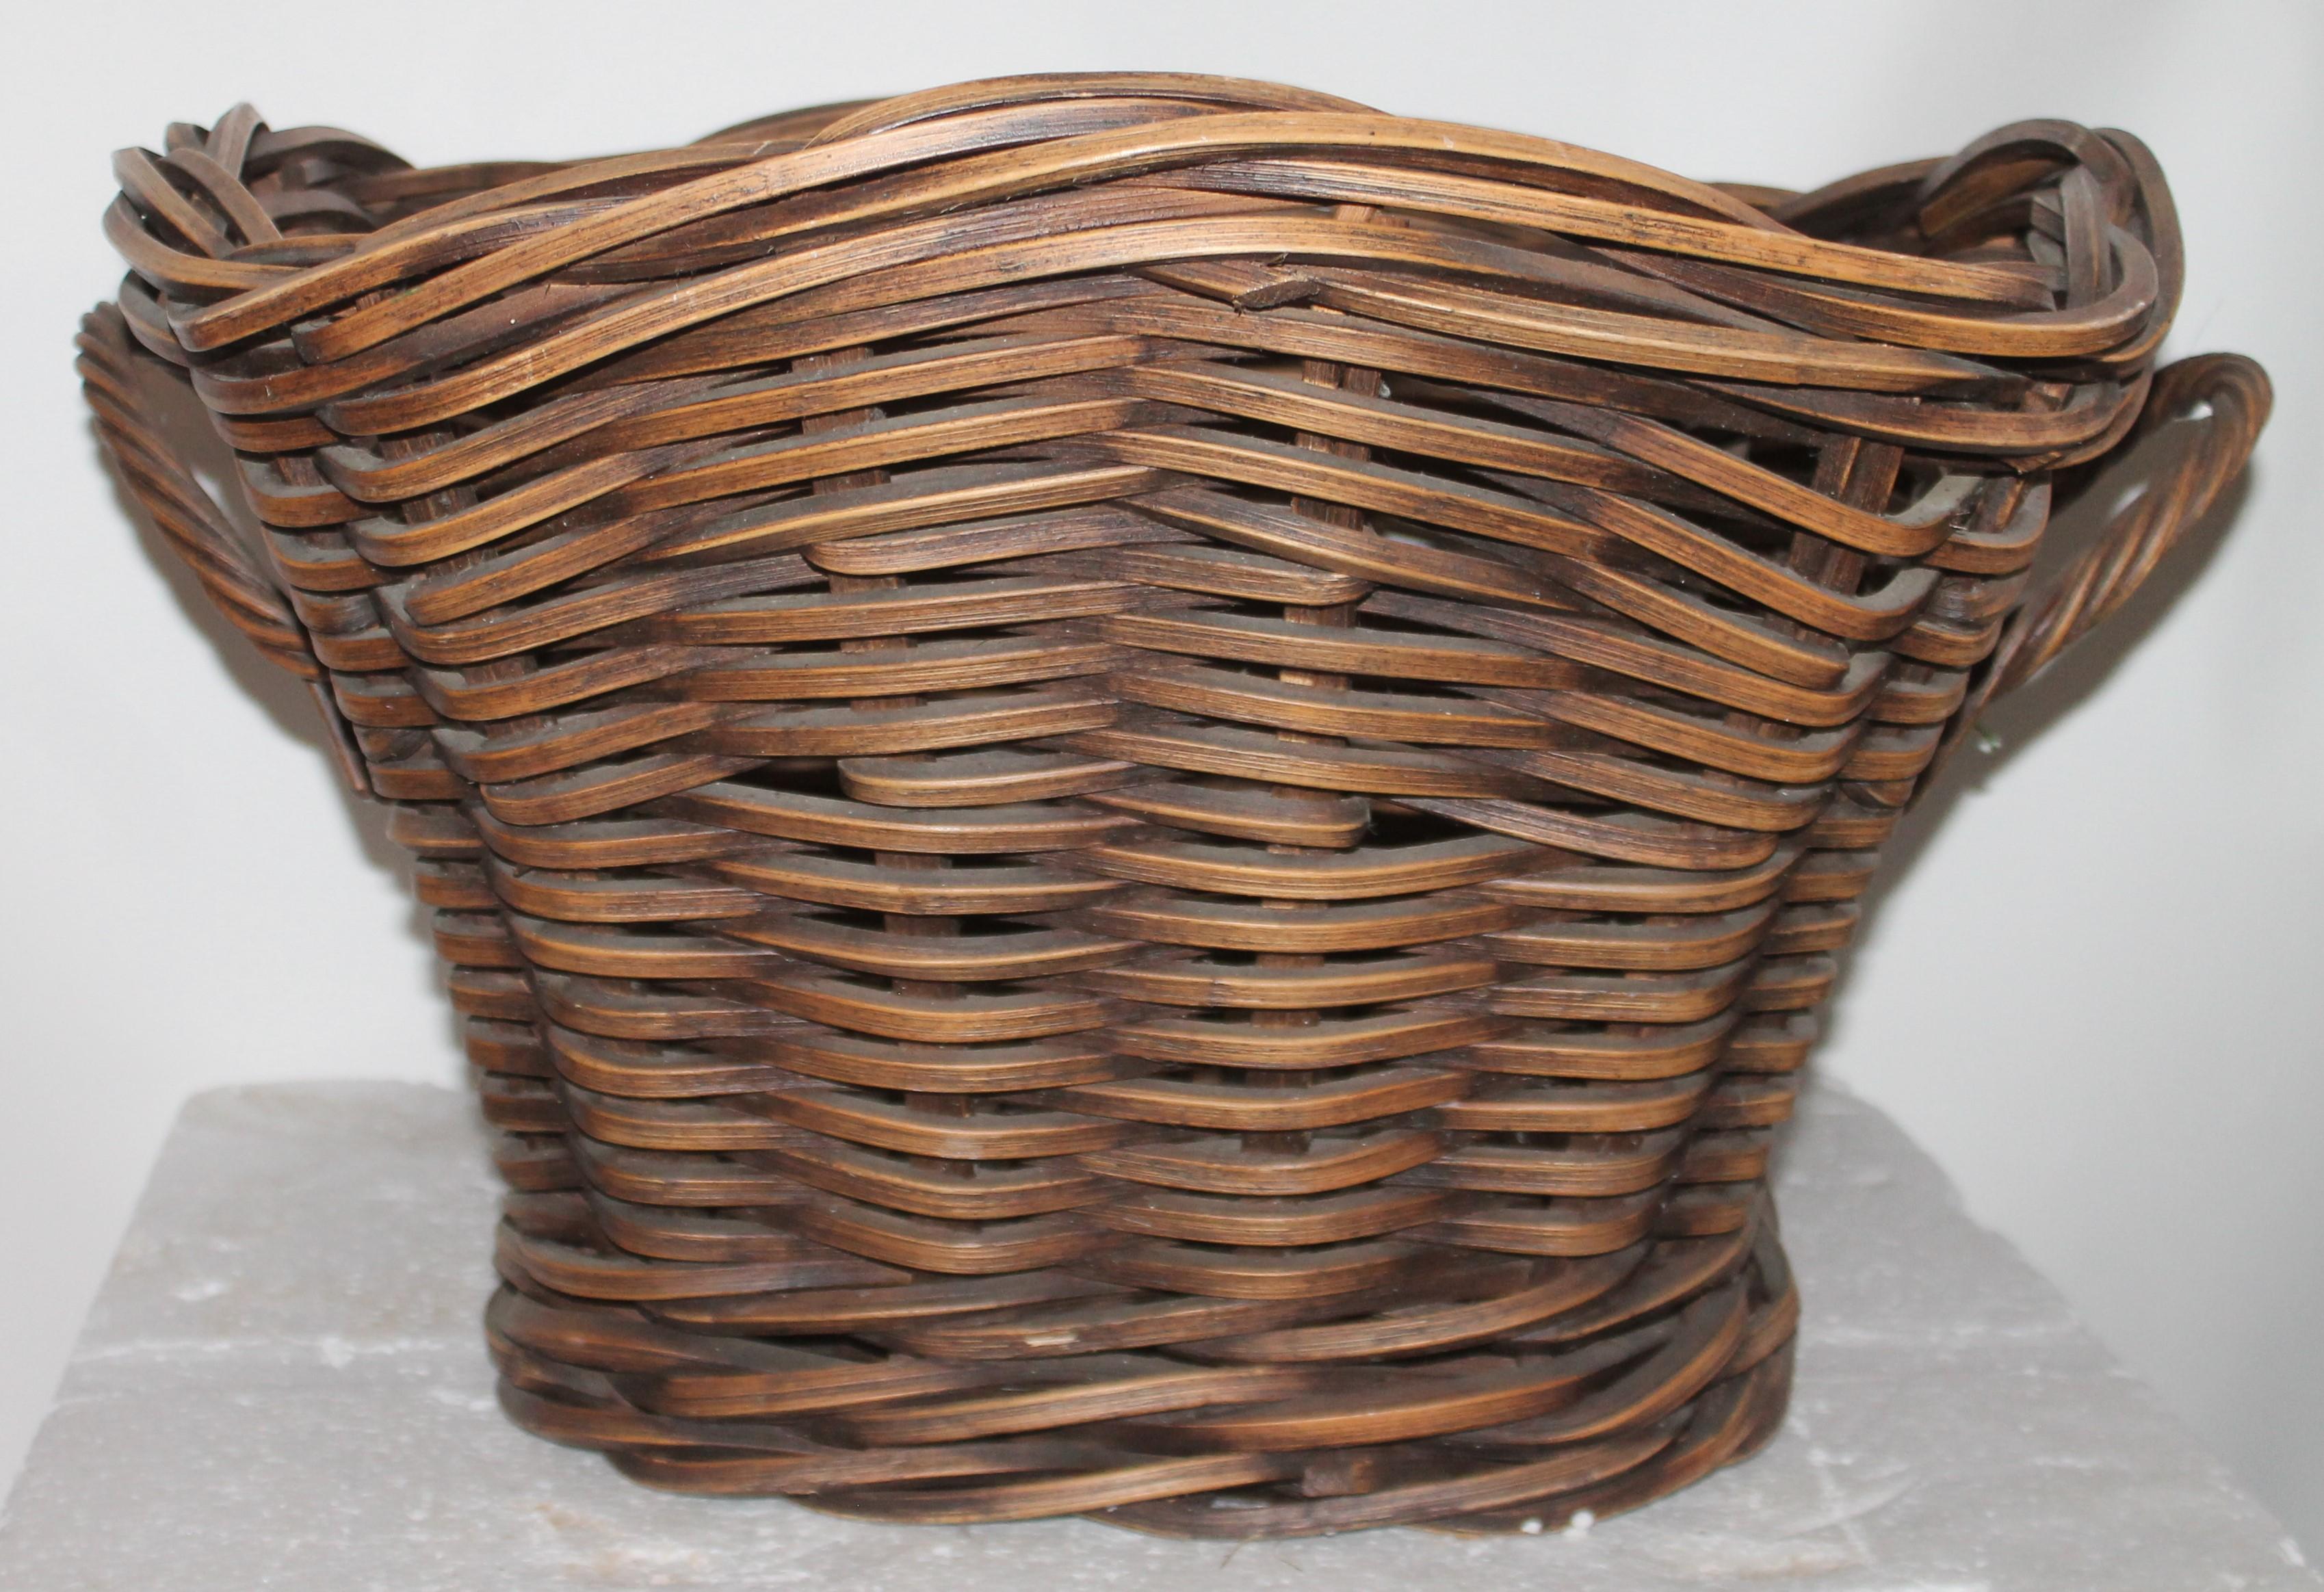 This fine handmade and woven basket is in great condition. The patina is really great.